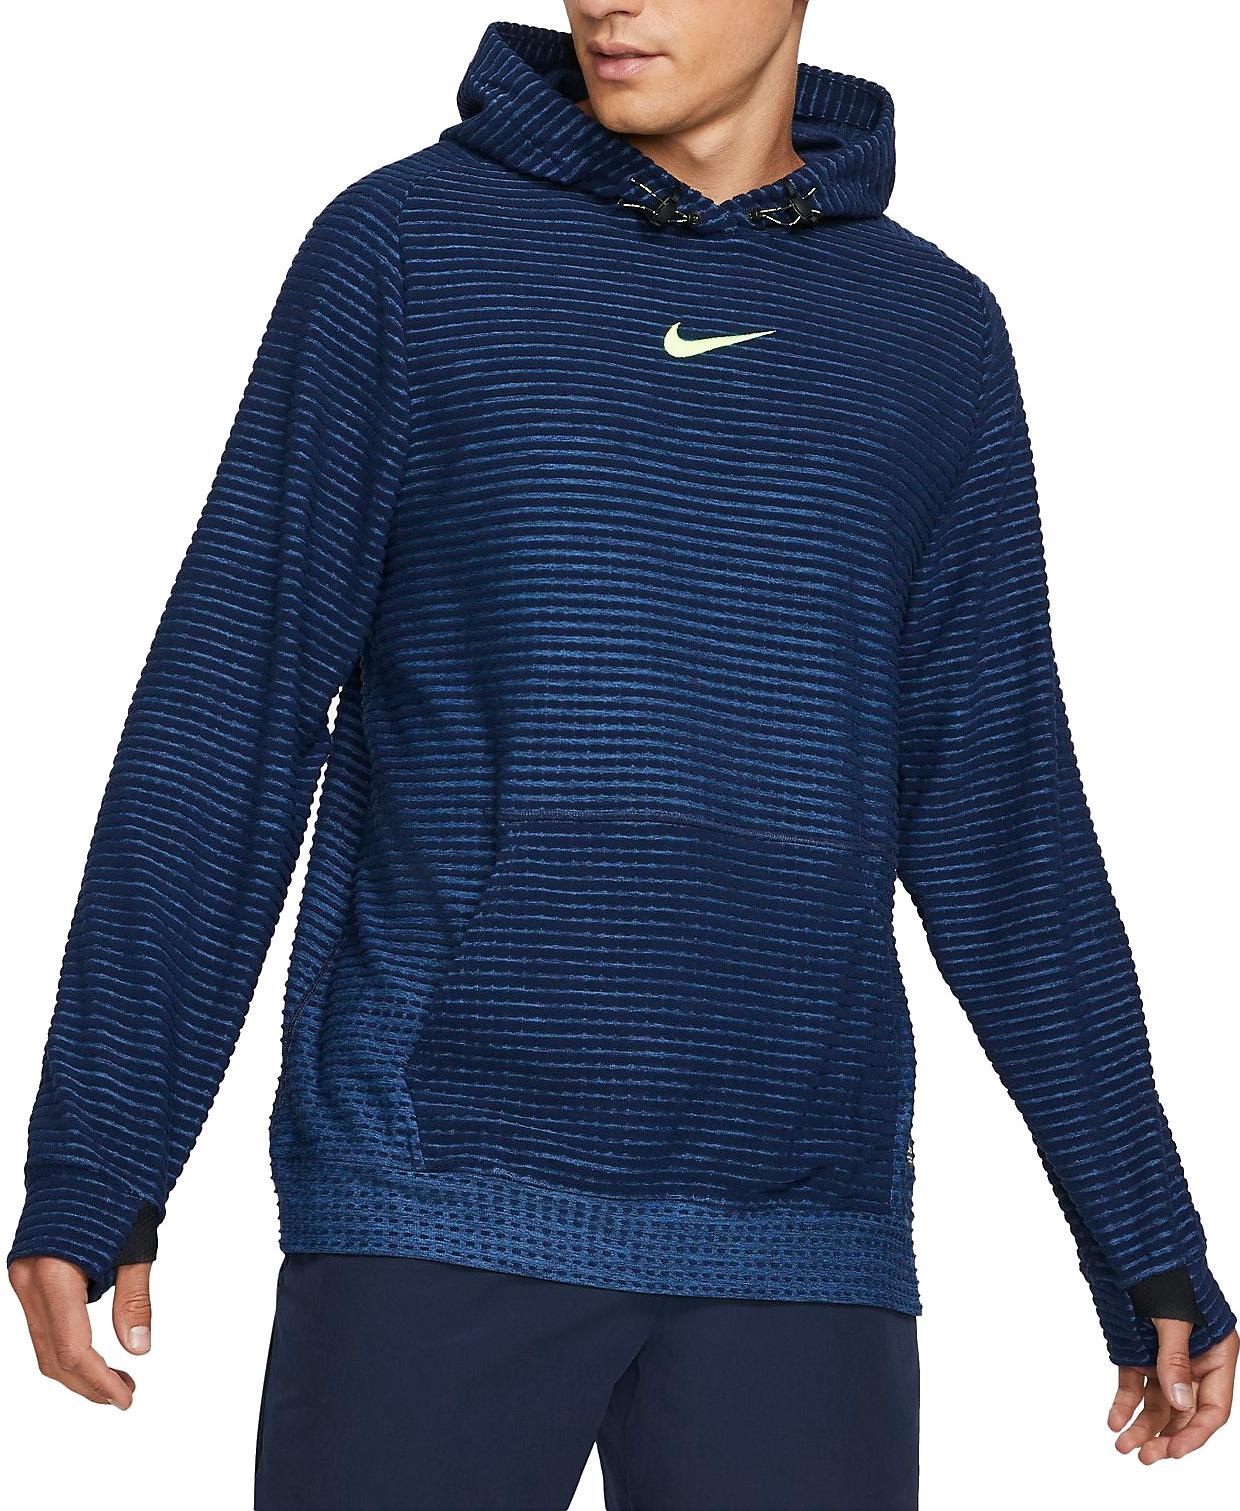 Hupparit Nike Pro Therma-FIT ADV Men s Fleece Pullover Hoodie